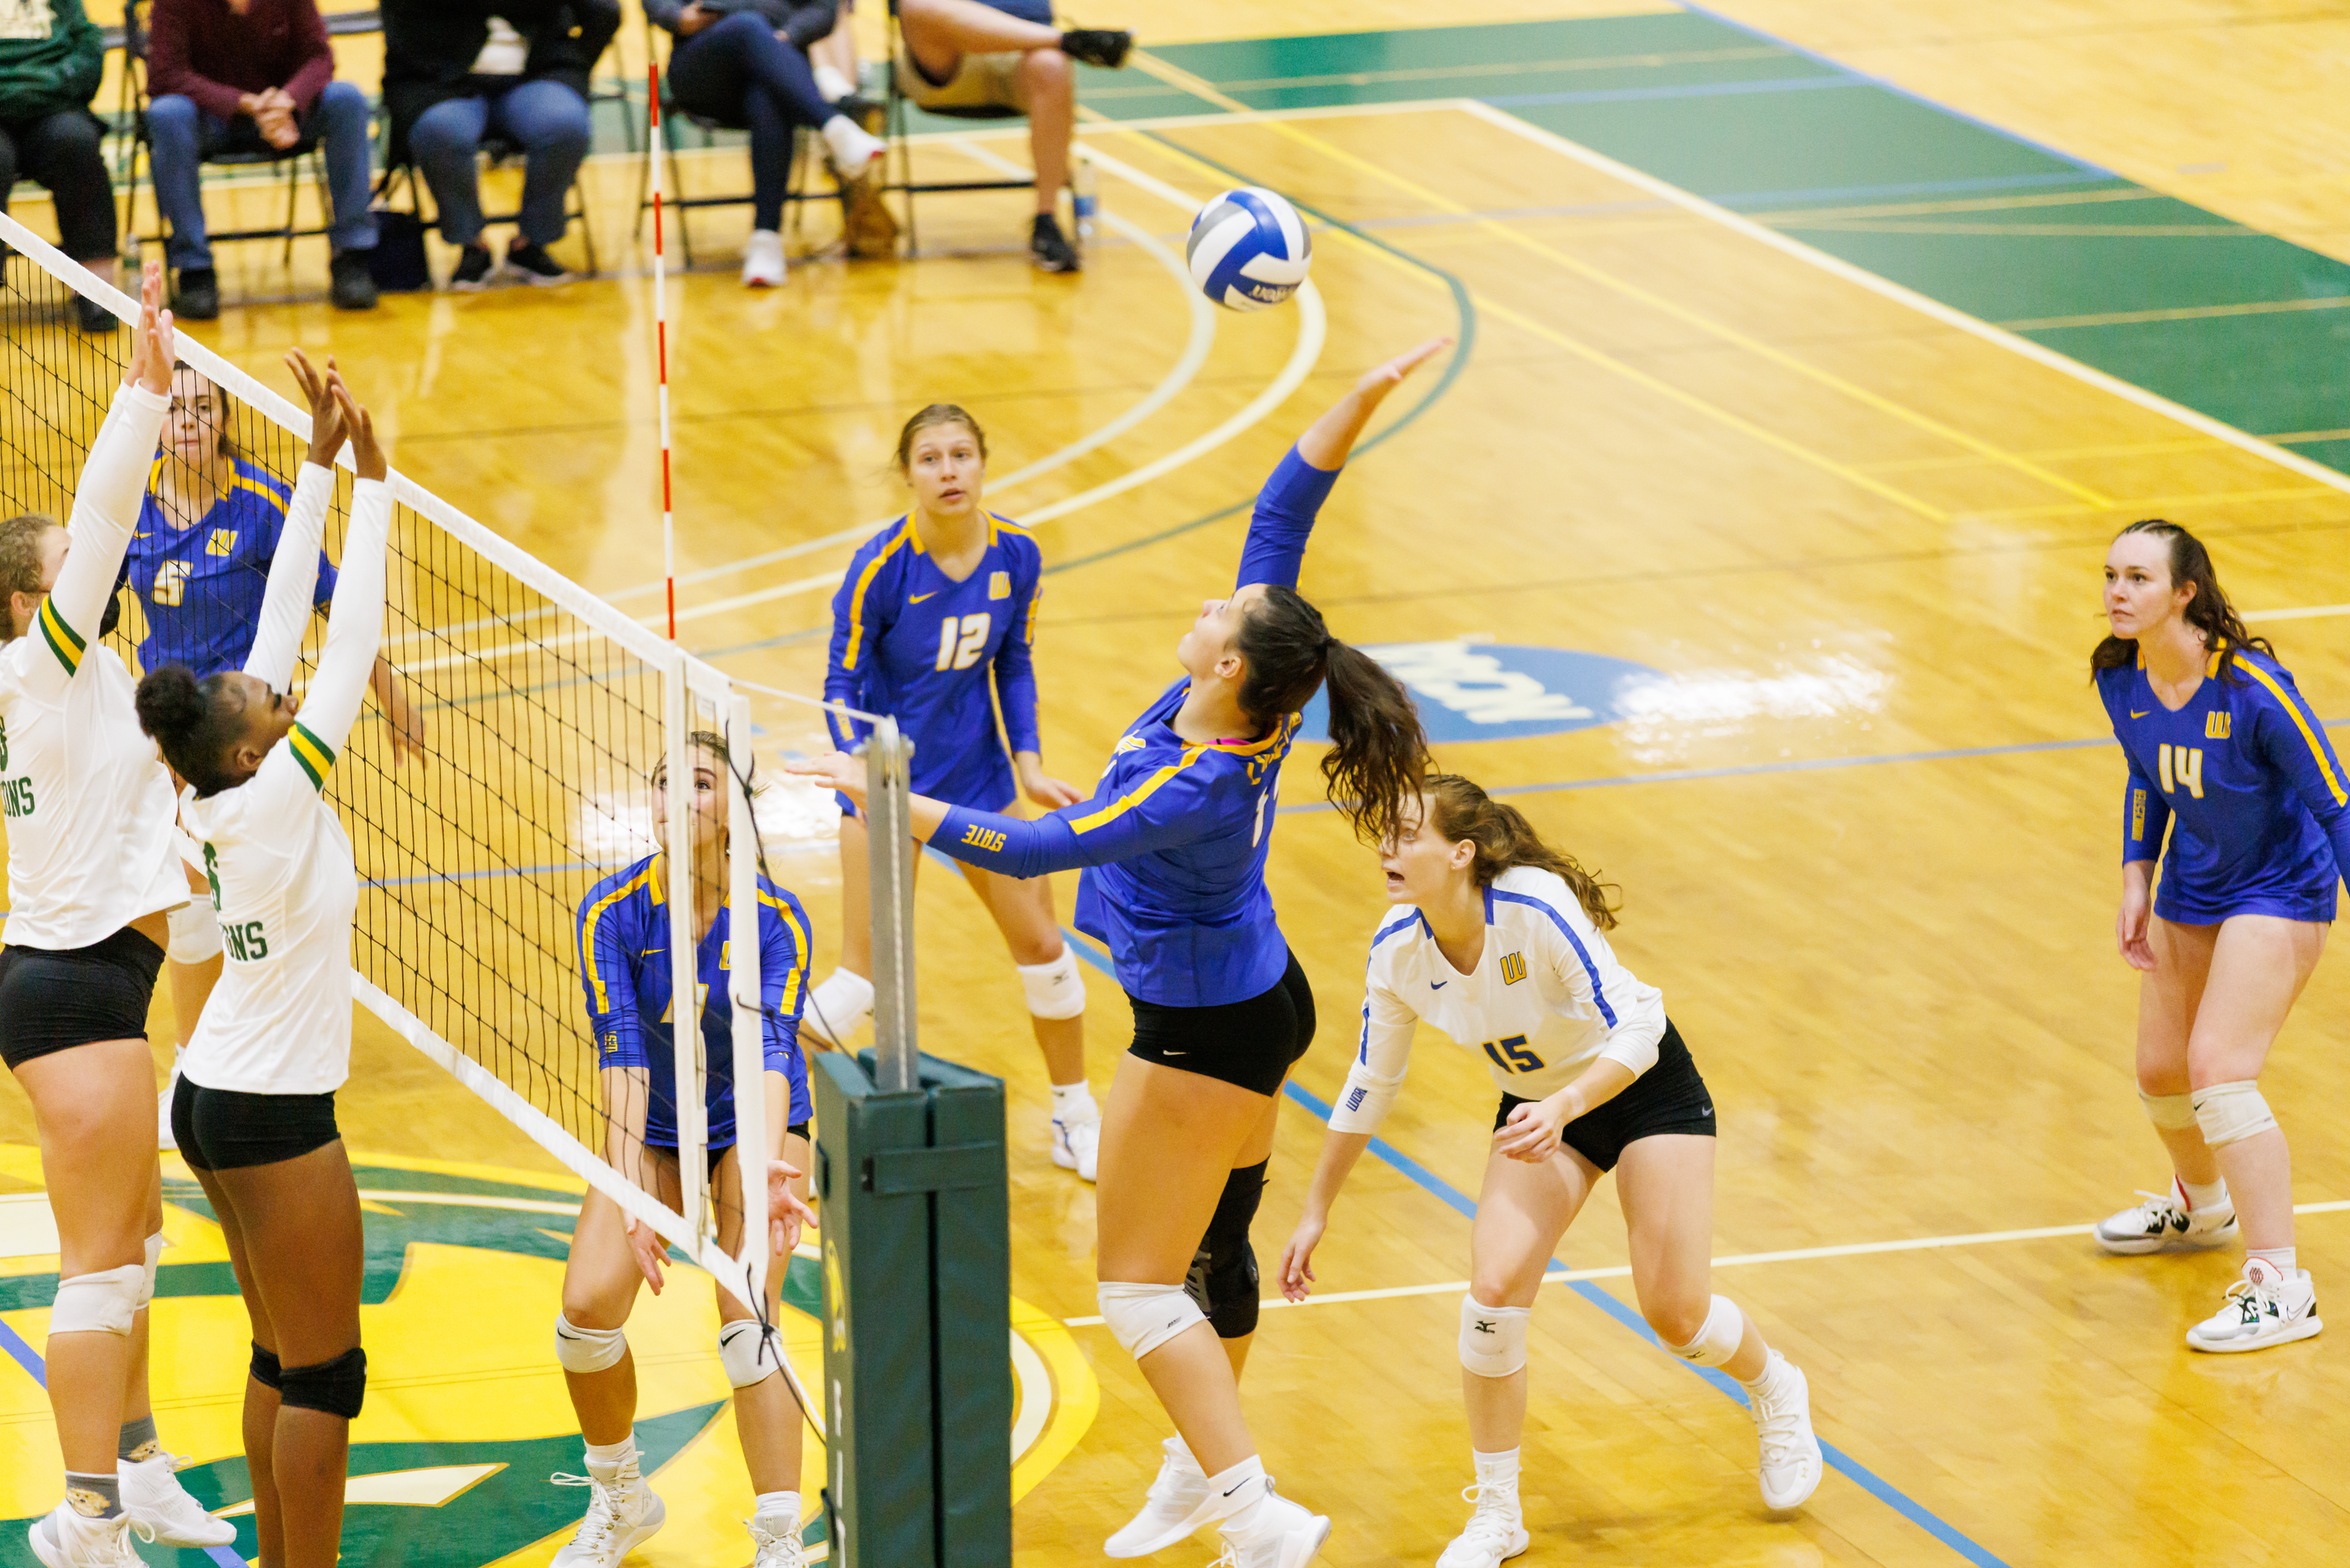 Lancers' Volleyball Secure Second Win in Two Days